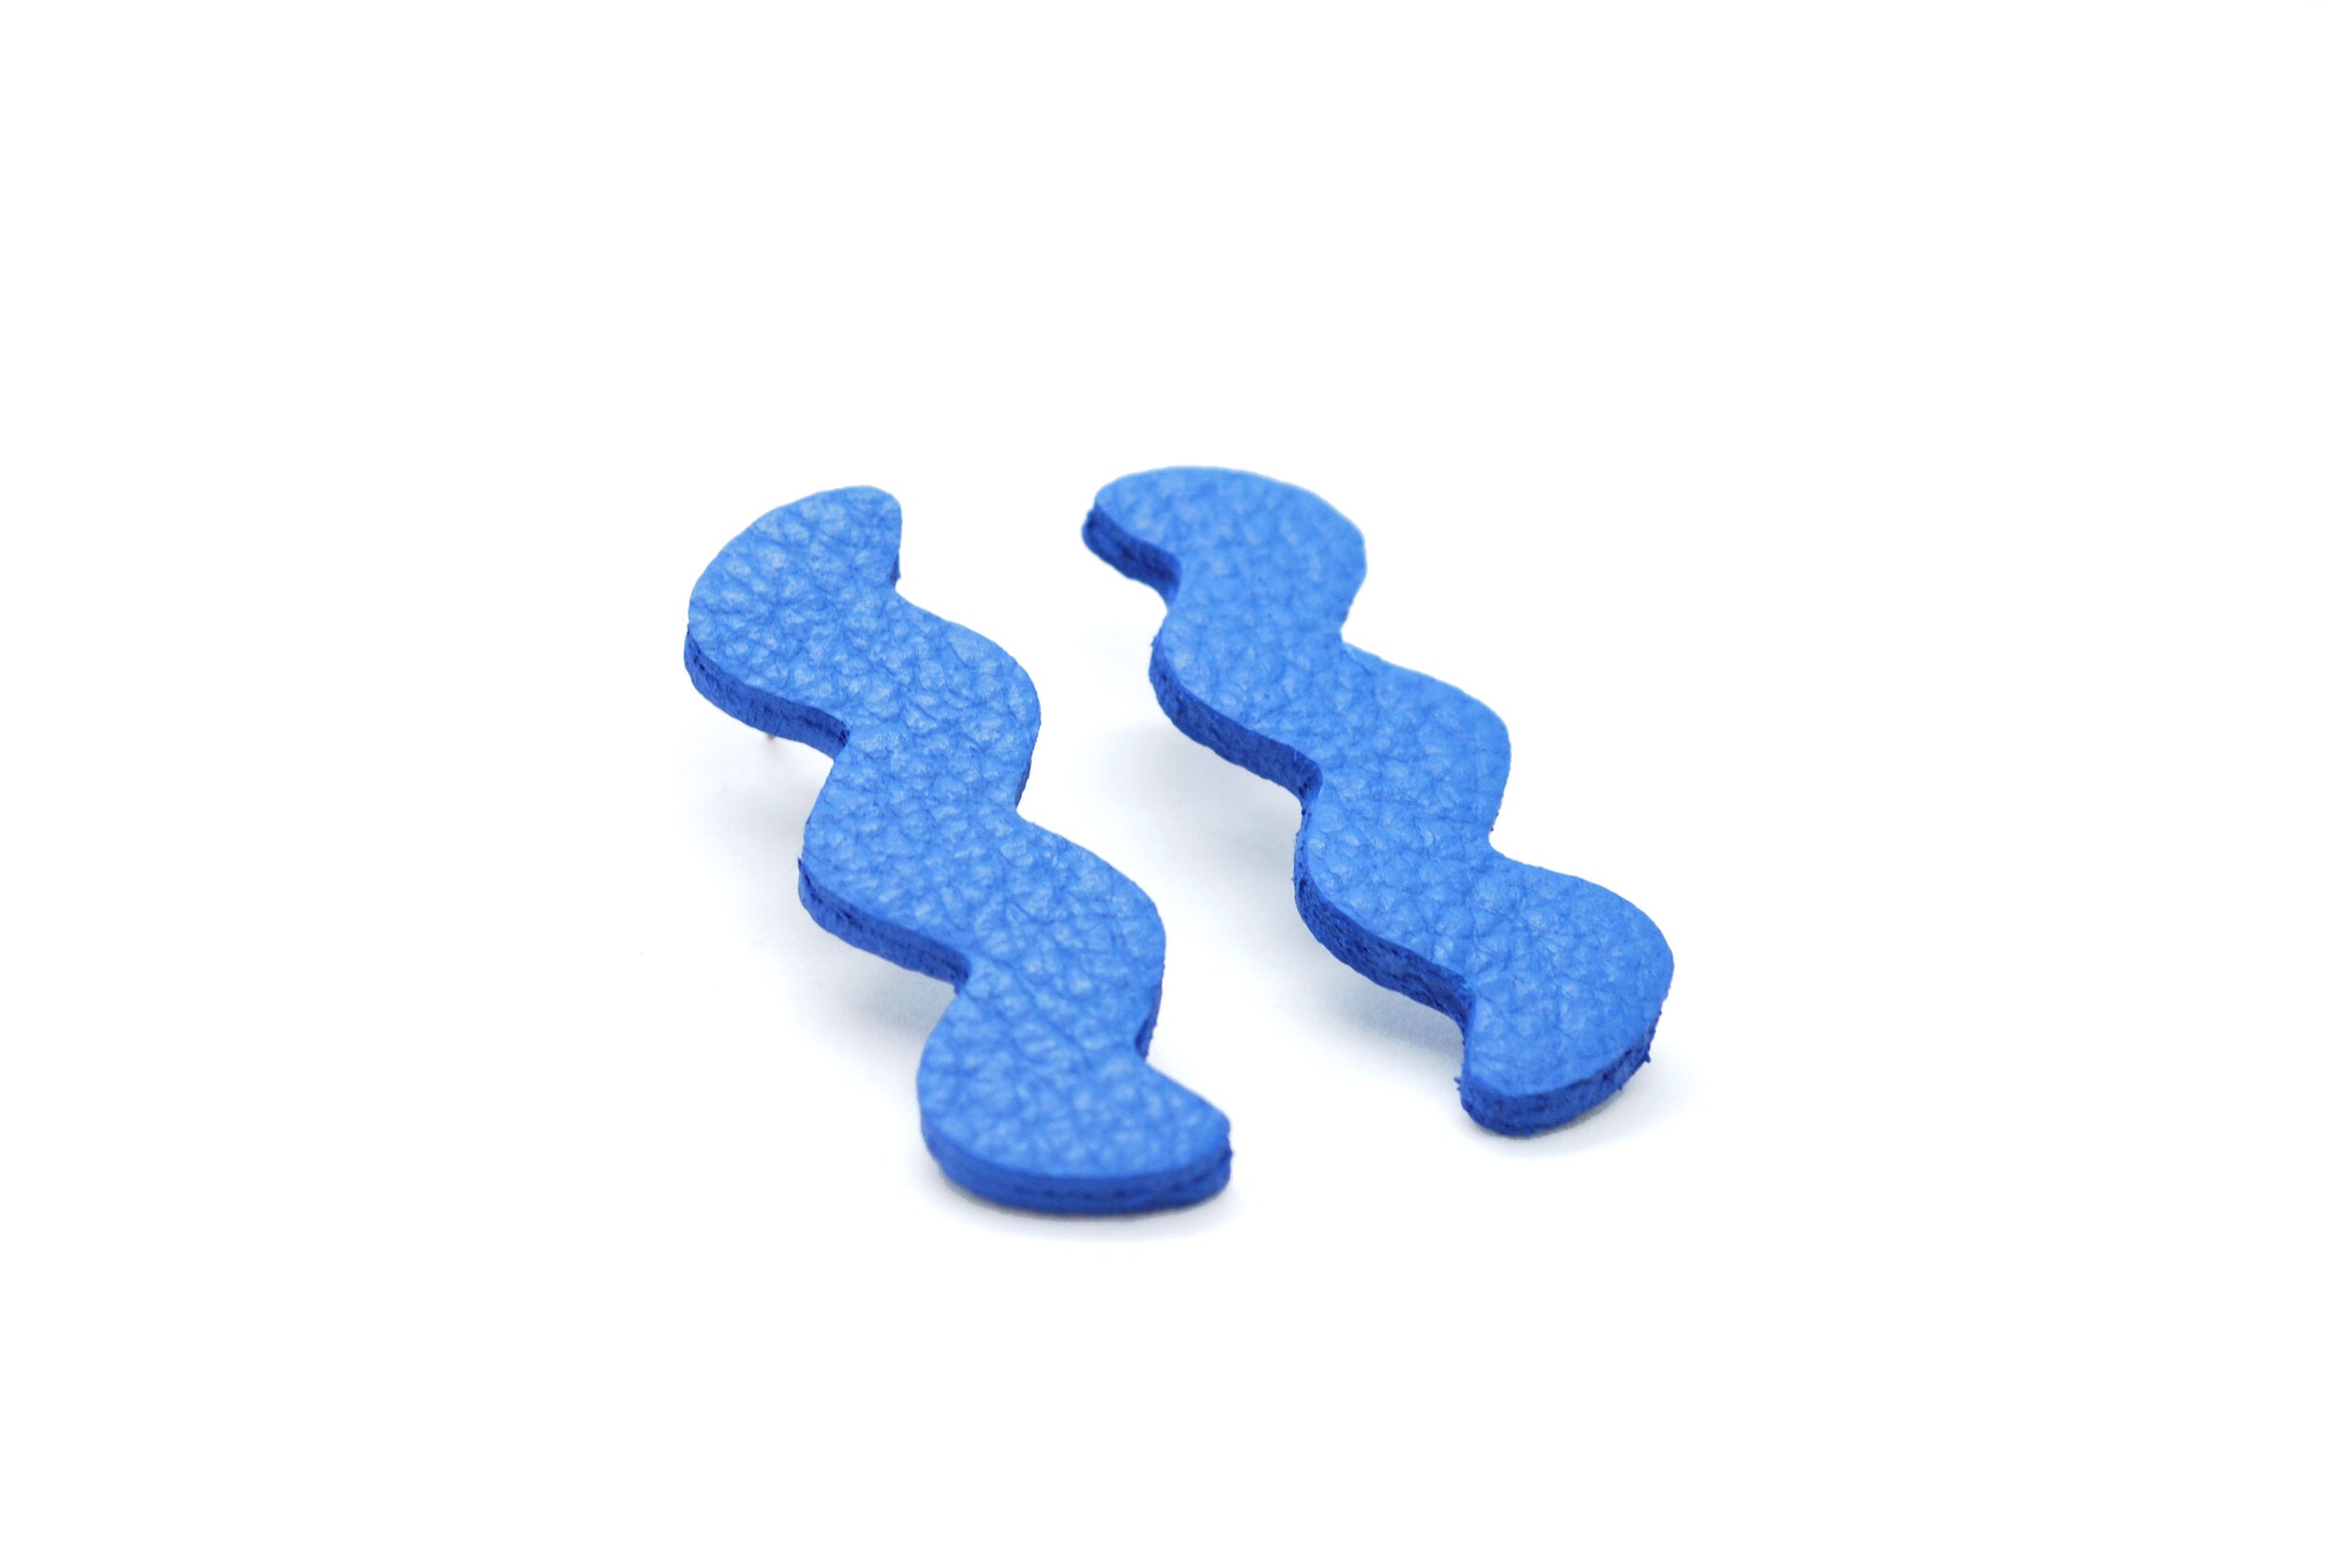 memphis style modern art ear rings in textured blue leather.